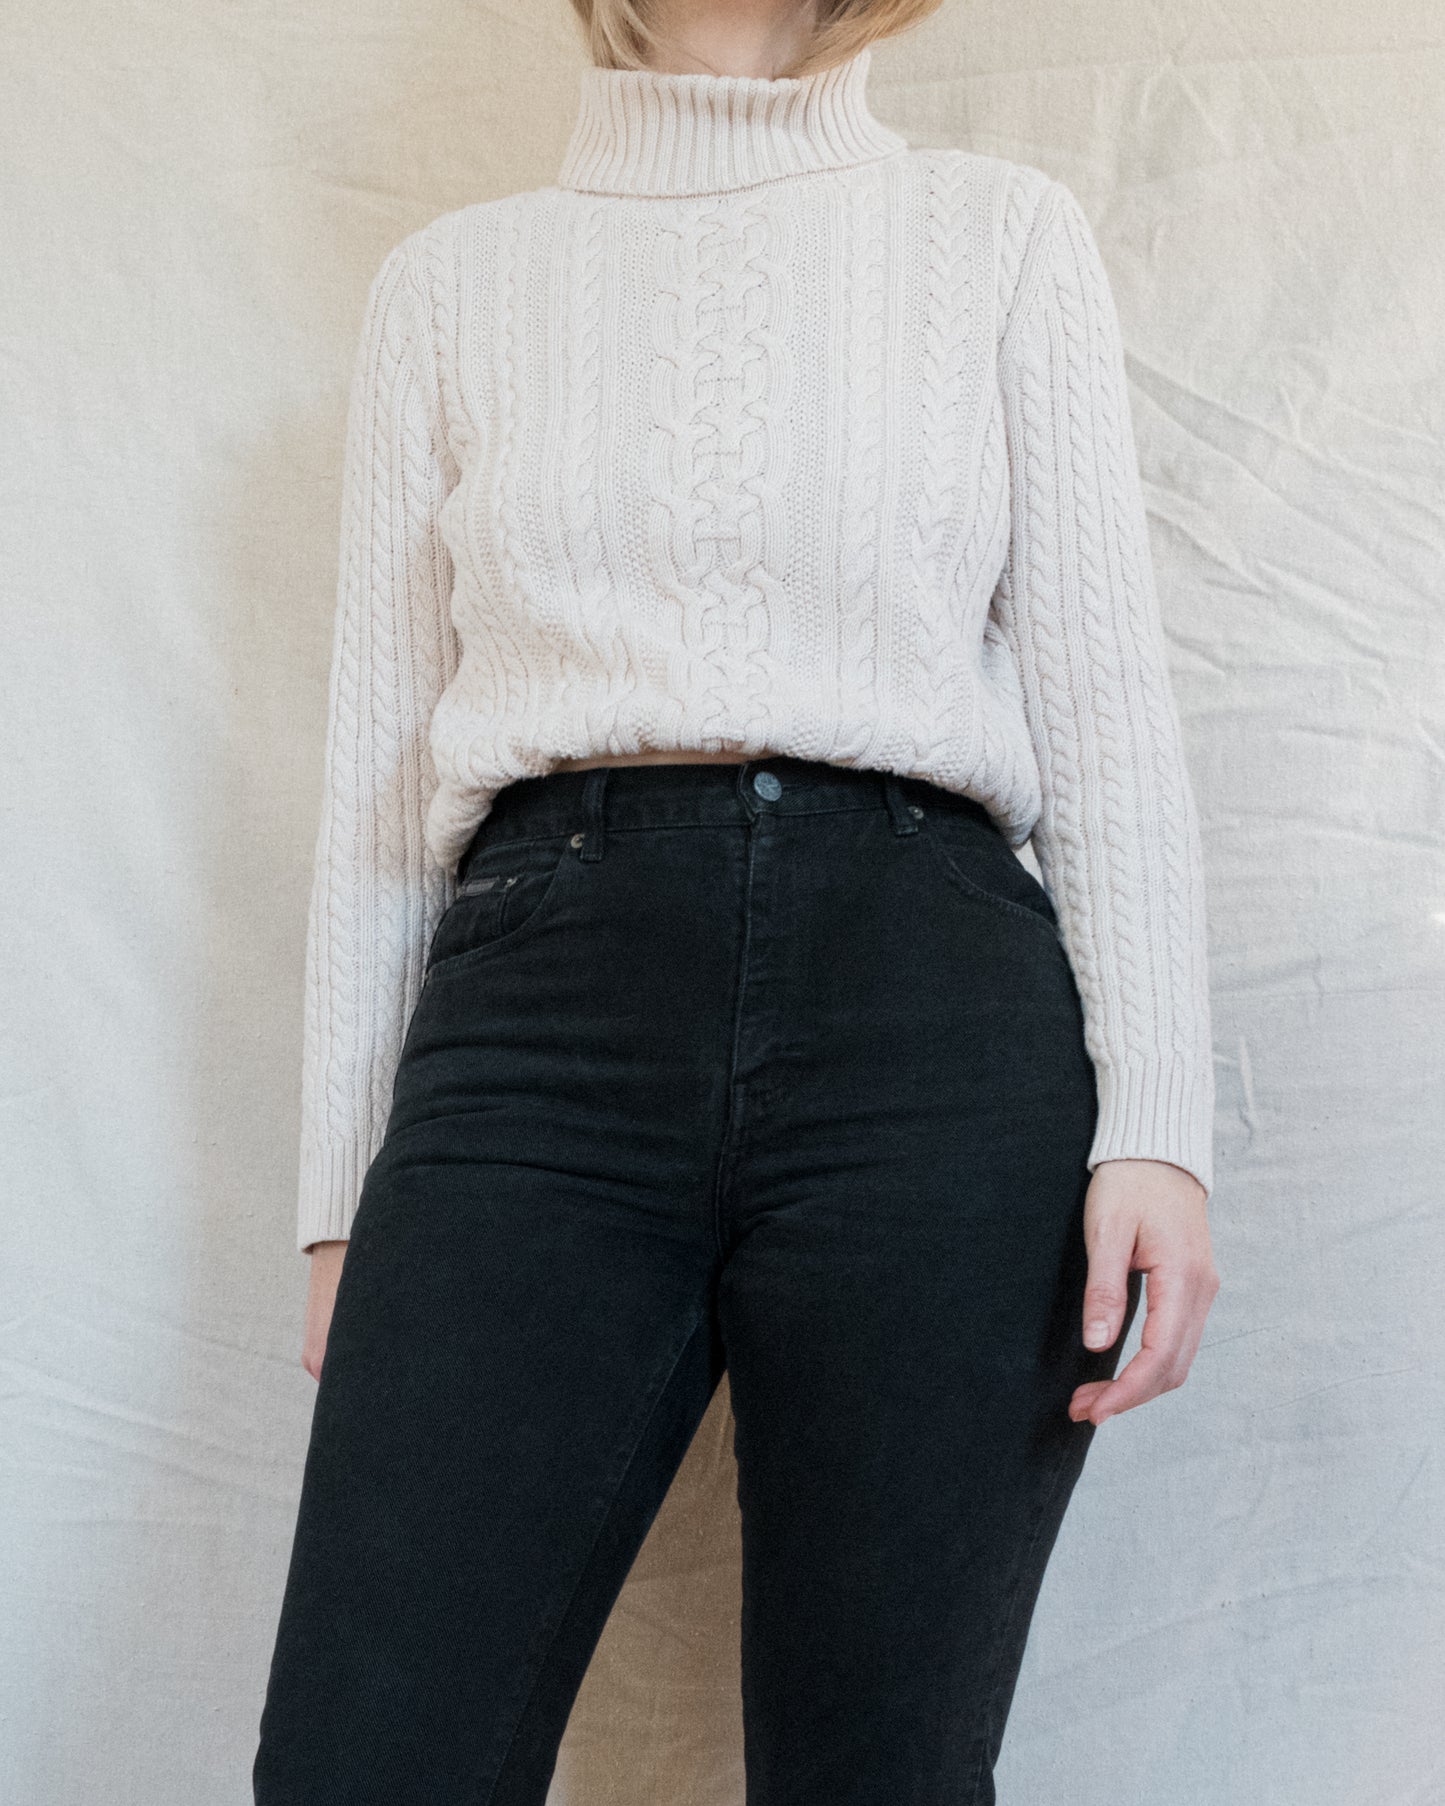 Vintage Cable Knit Reworked Sweater (XS/S)